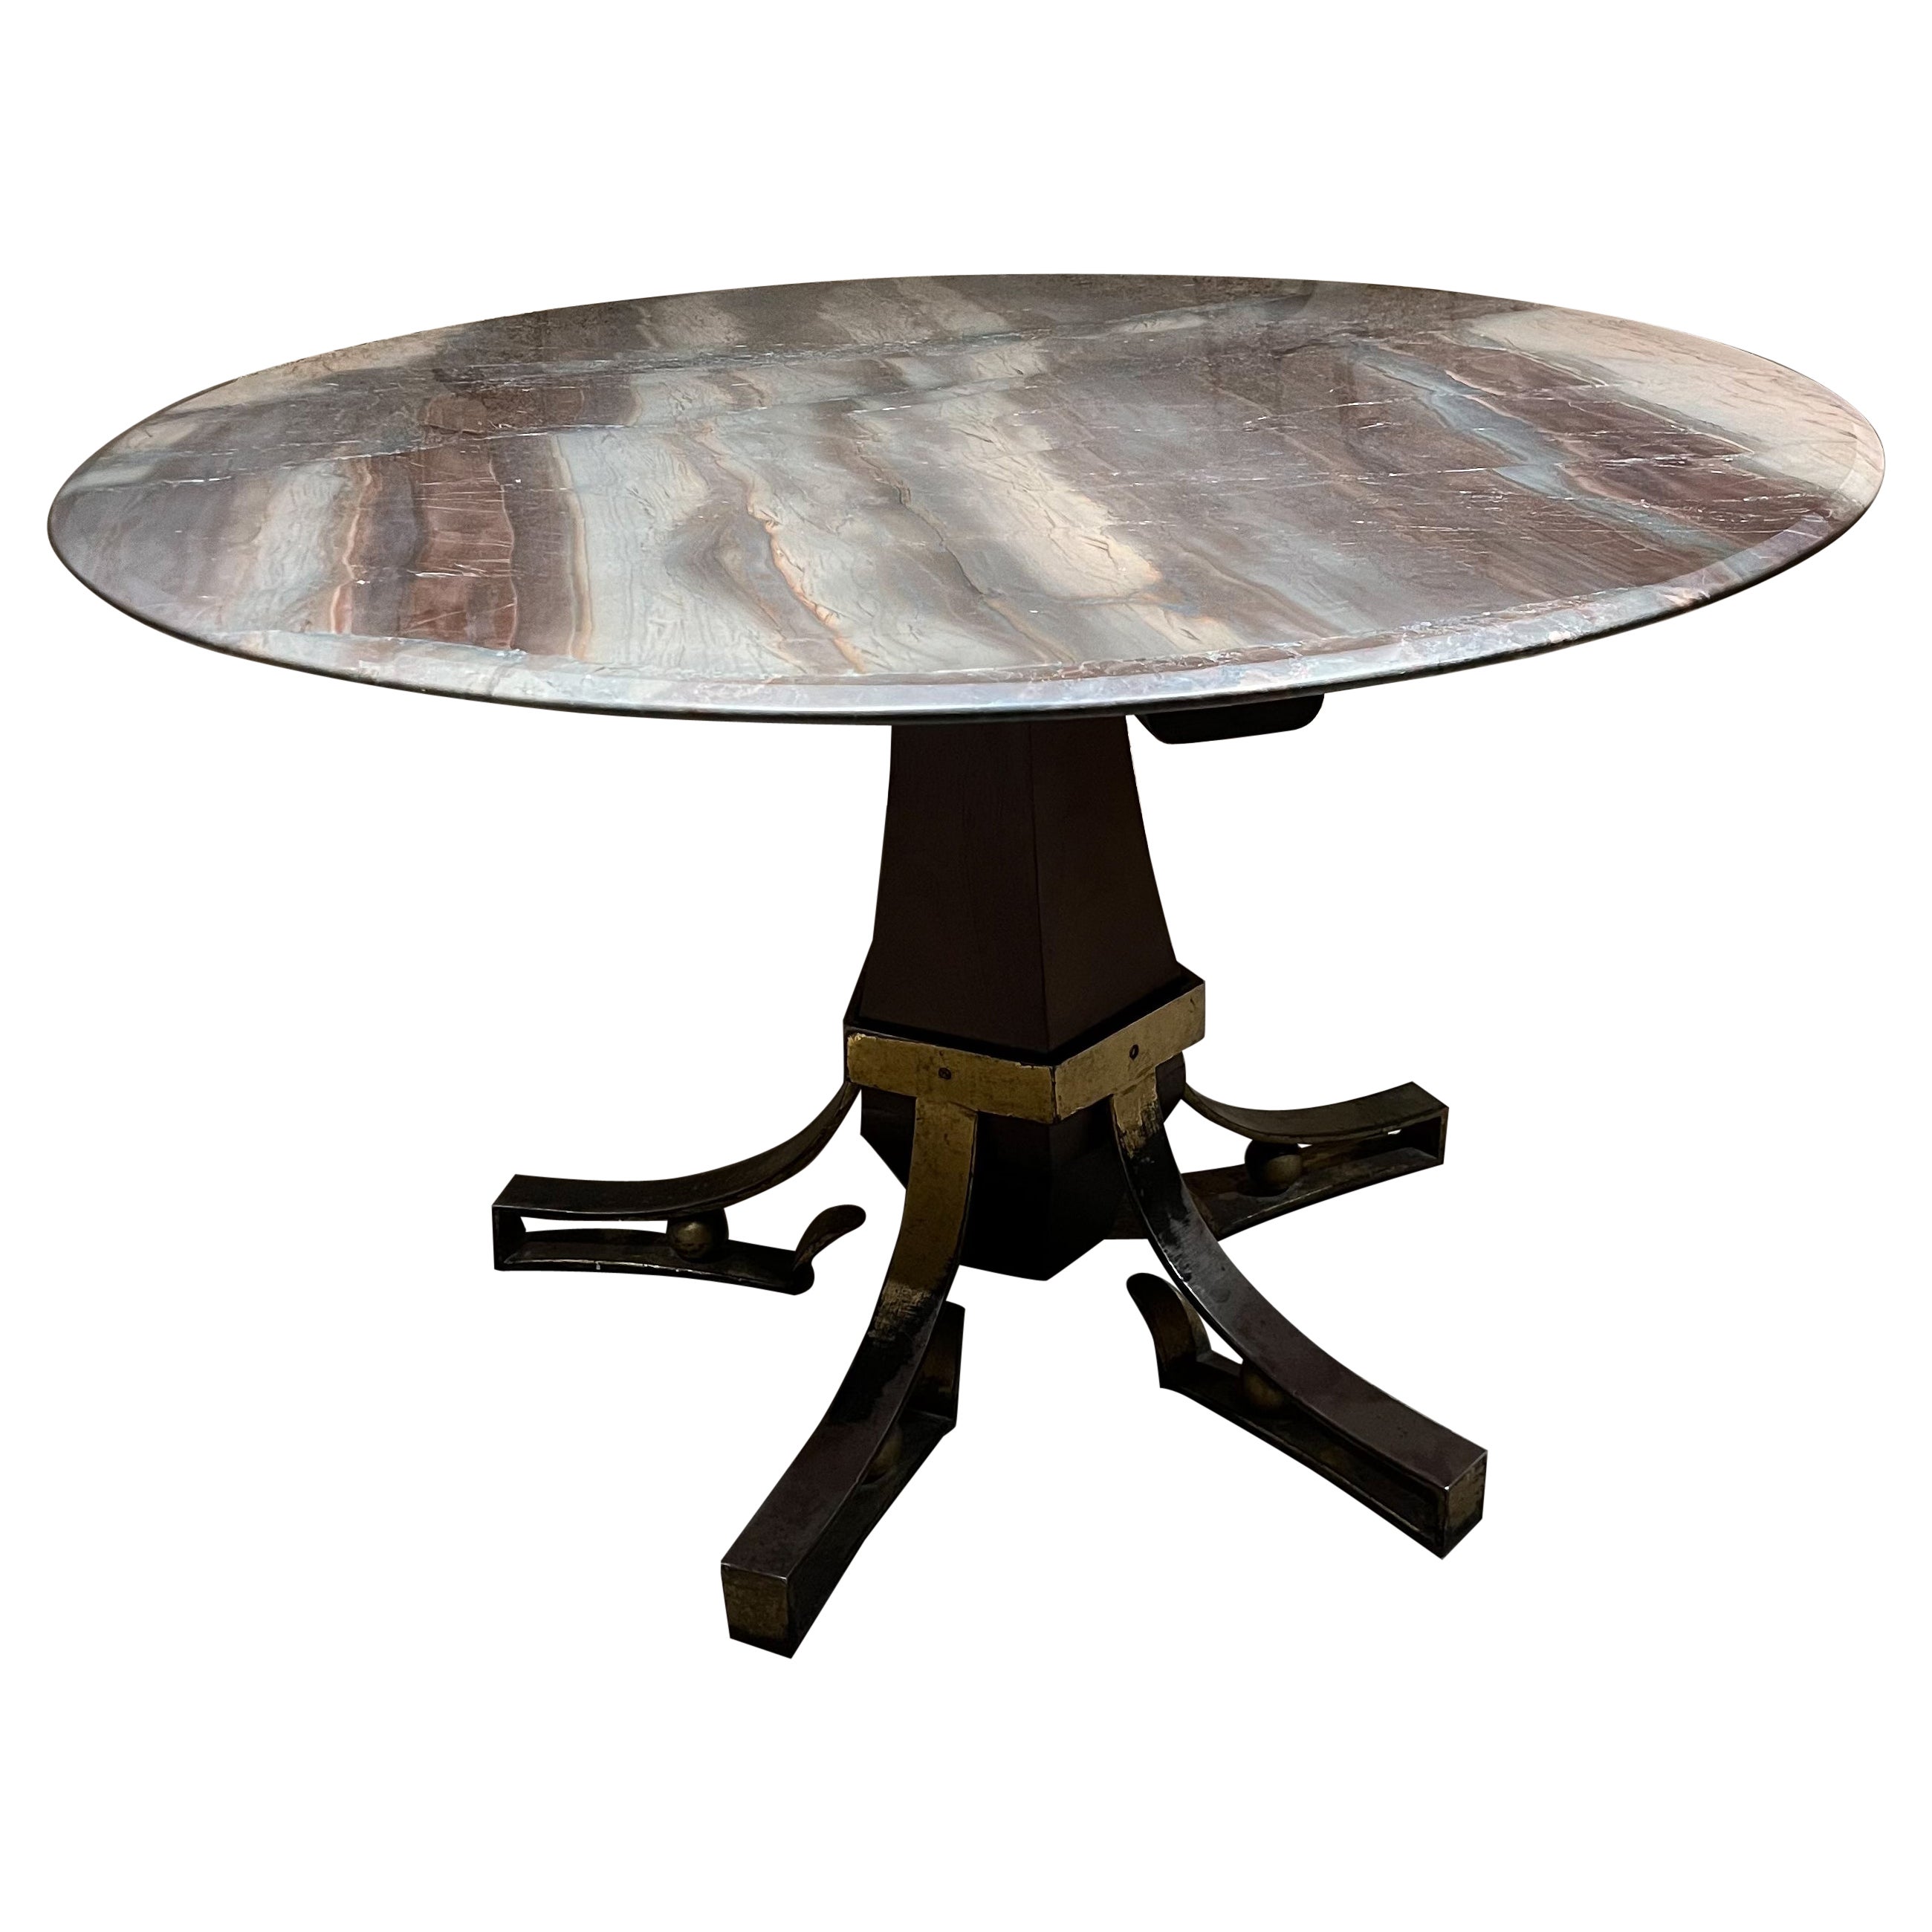 Mid-Century Modern 1950s Arturo Pani Forged Iron Mahogany Marble Dining Table Mexico City For Sale